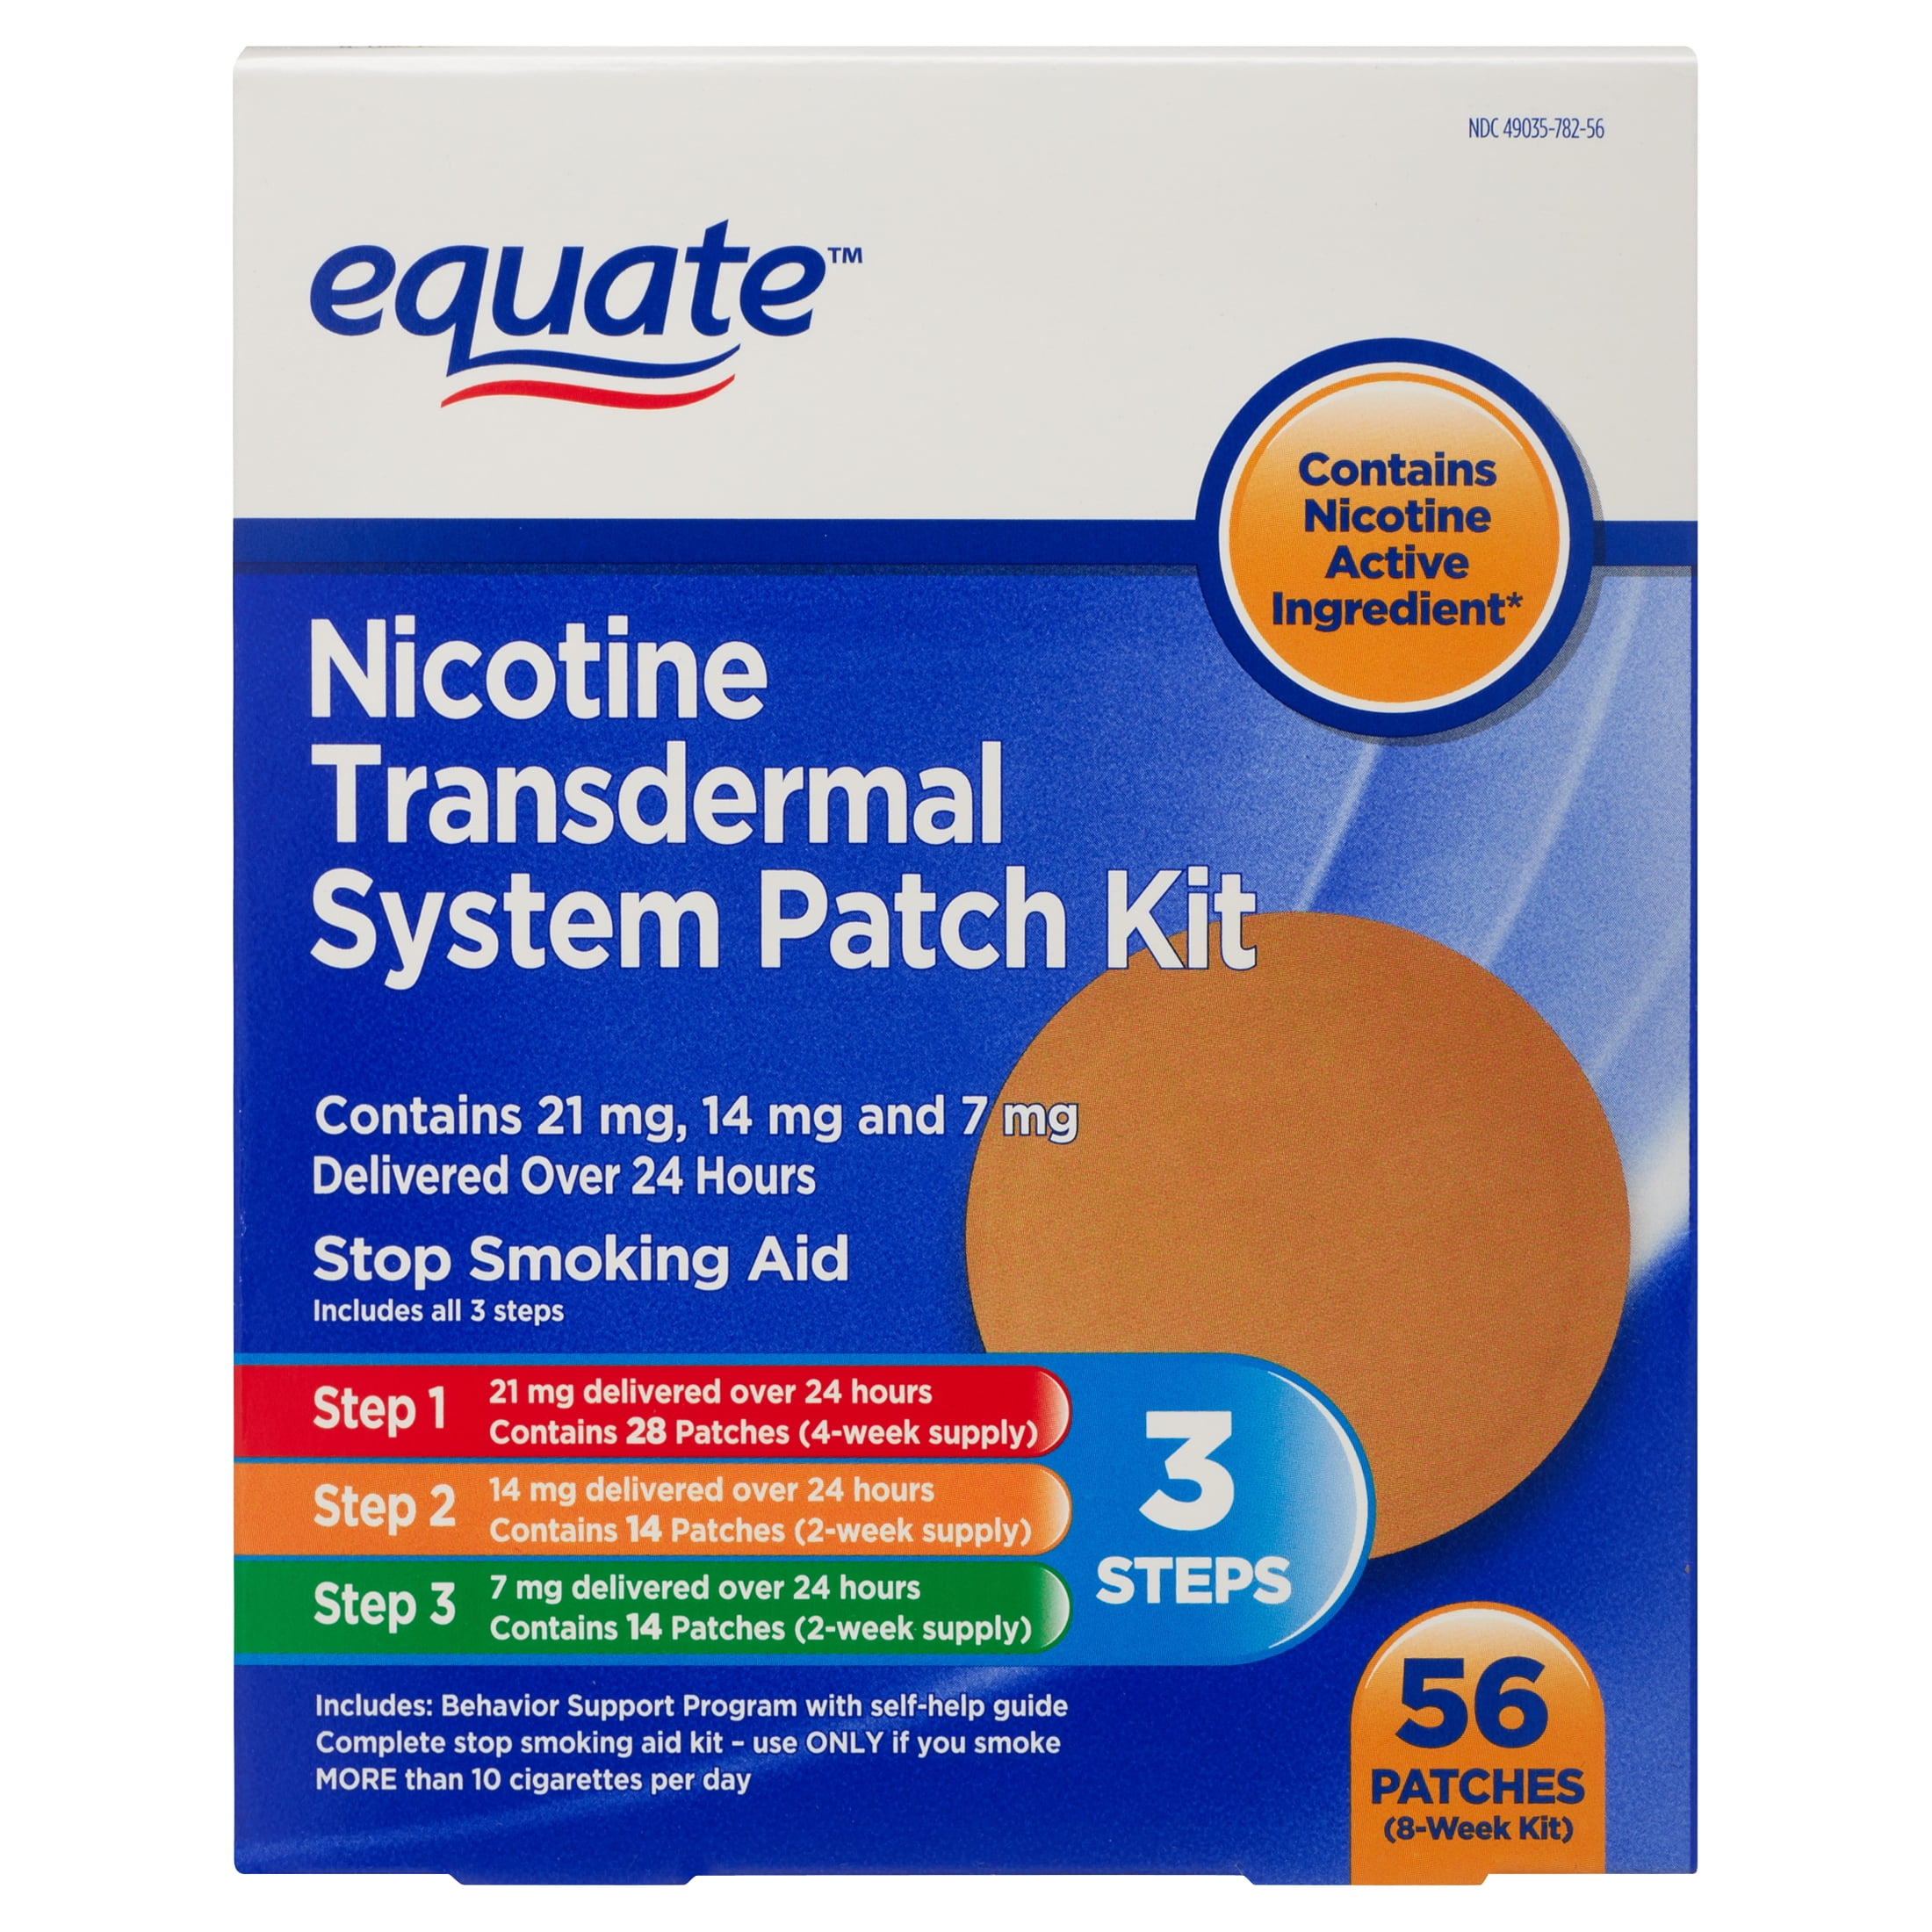 Are Nicotine Patches Available Over the Counter?